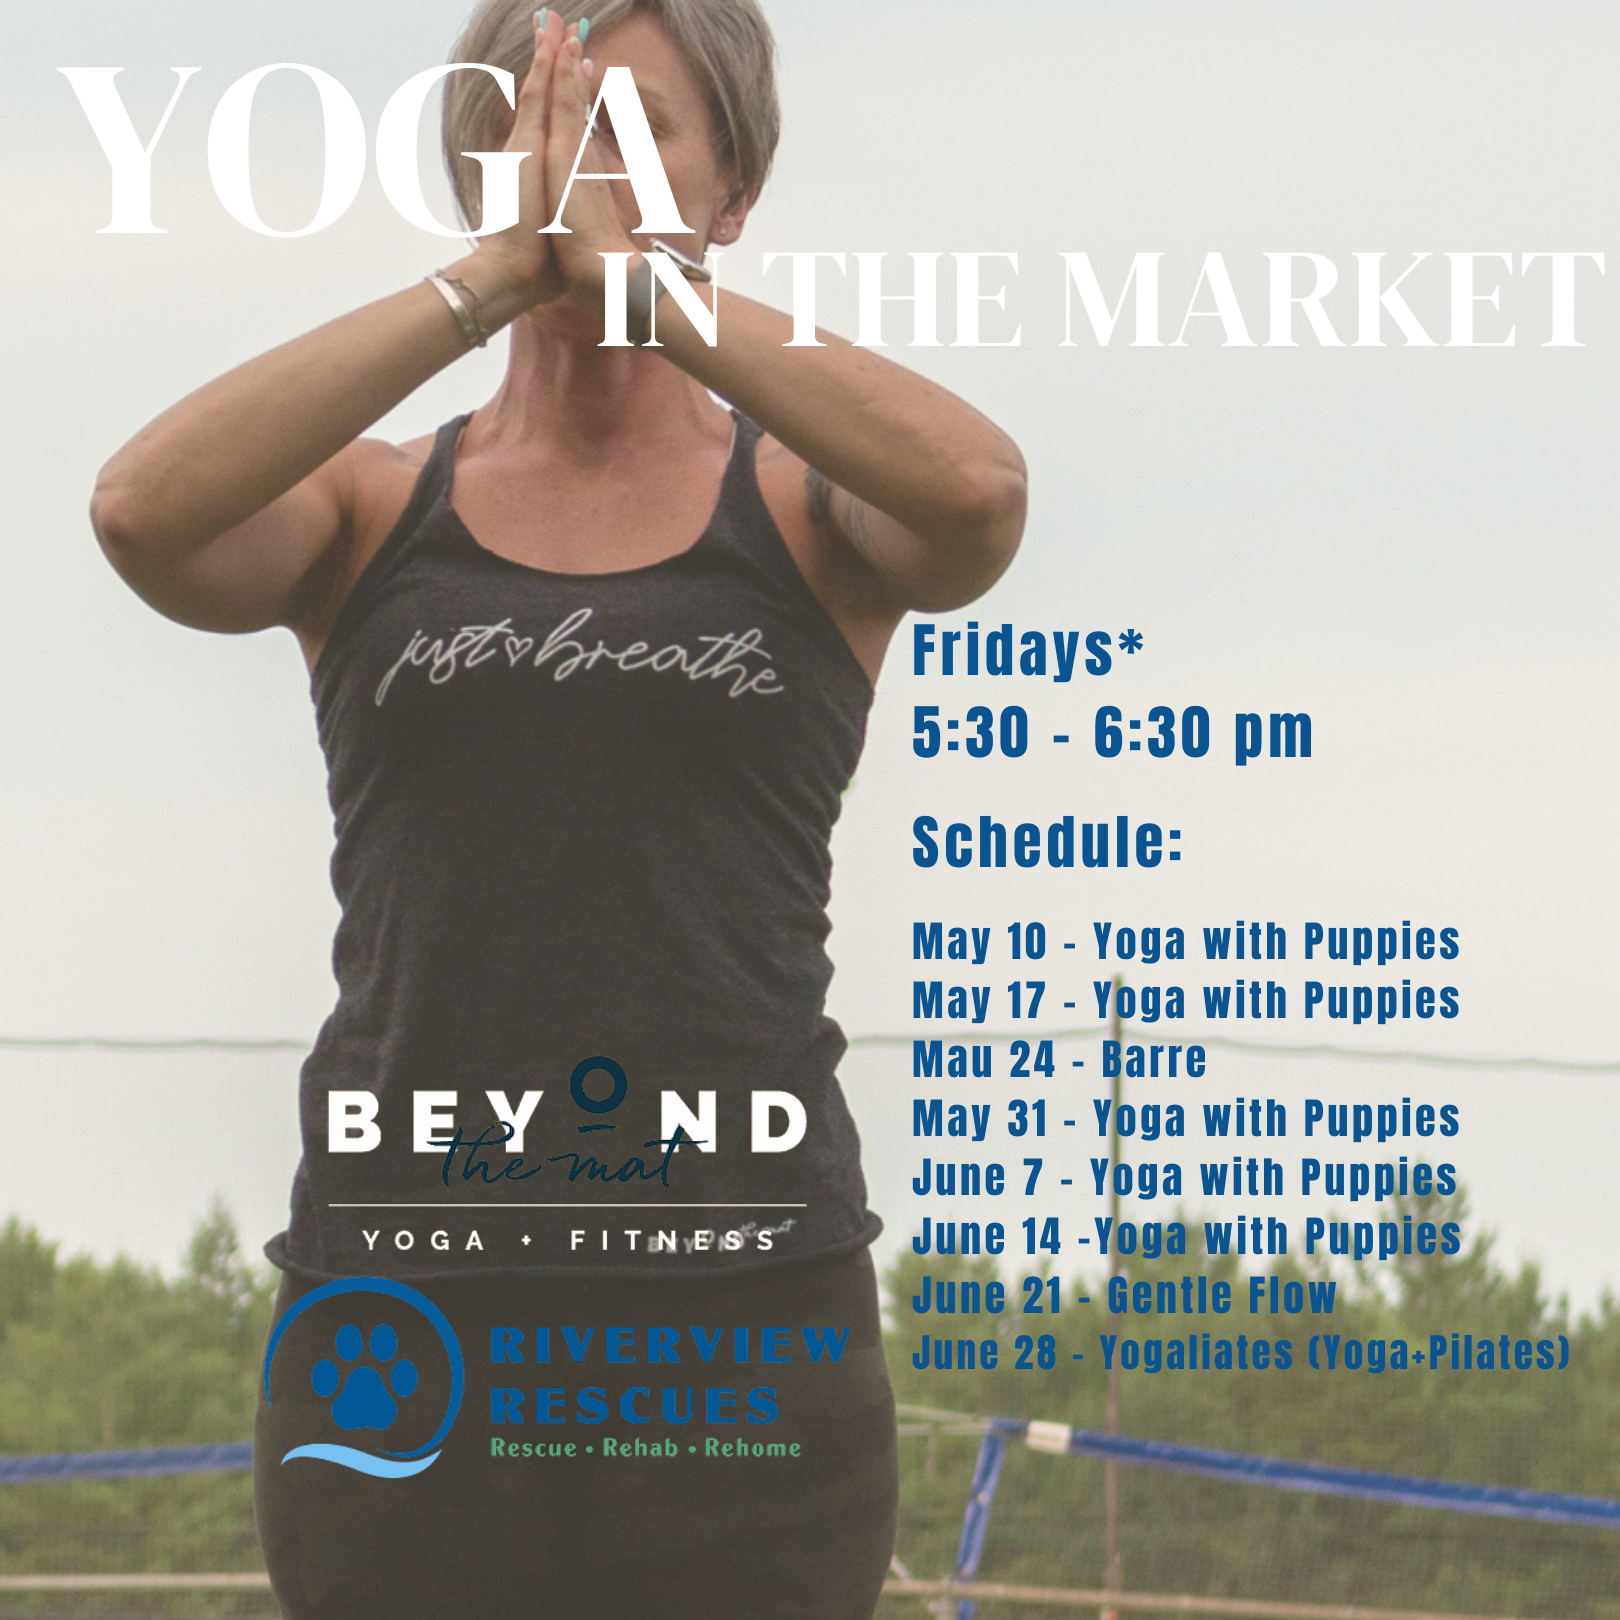 Yoga in the Market poster with schedule